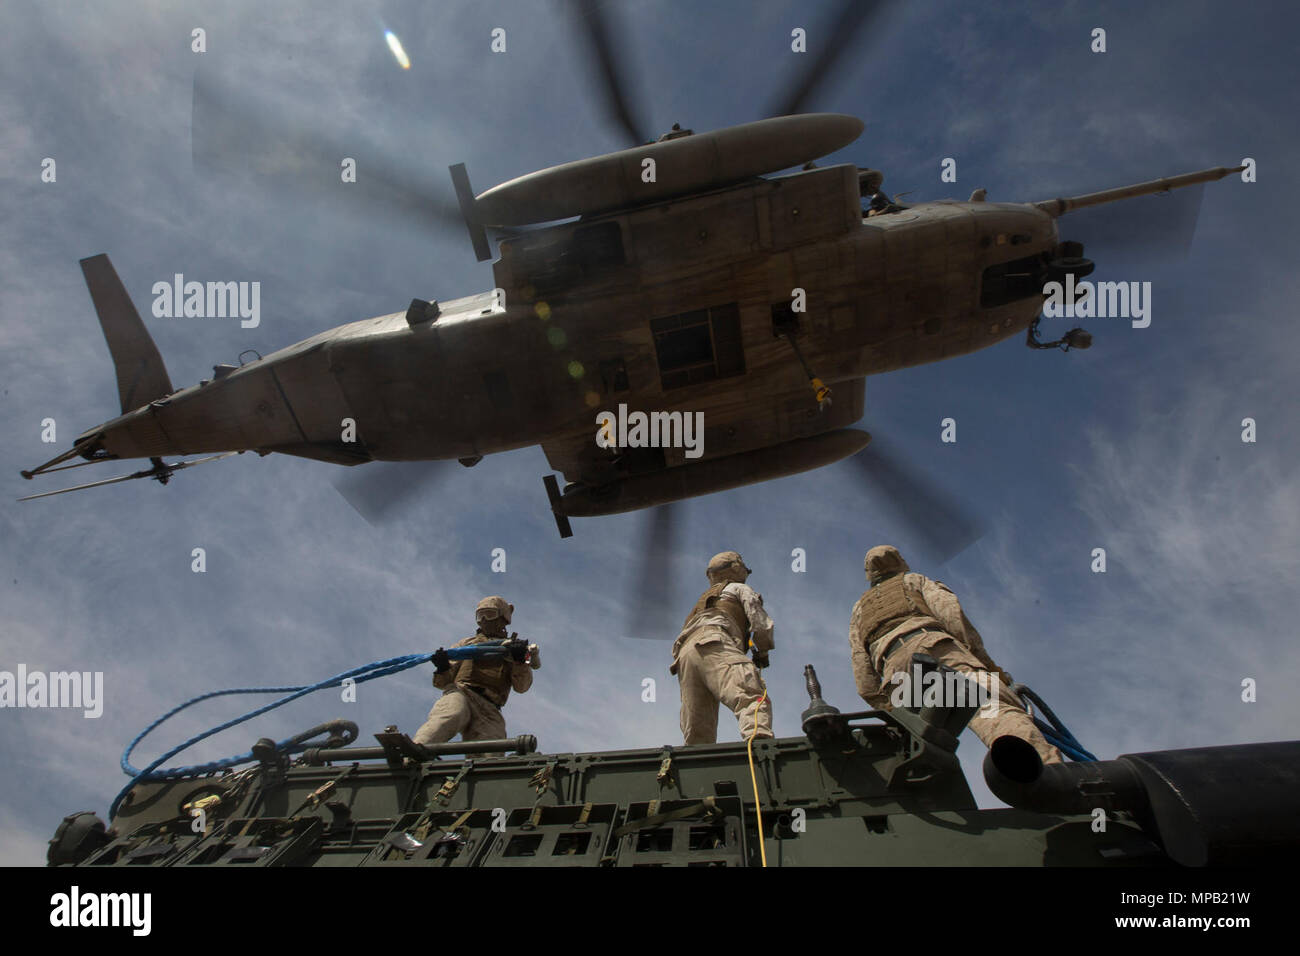 From left to right, U.S. Marine Corps Cpl. Tremayne O. Stinnett, Lance Cpl. Michael J. Mitchell, and Lance Cpl. Erick Alvarado, landing support specialists, with 1st Transportation Support Batallion, attach while a Light Armored Vehicle 25 to a CH-53E Super Stallion during a CH-53 tactics exercise at Auxiliary Airfield II, Yuma, Ariz., April 7, 2017. The exercise is part of Weapons and Tactics Instructor Course (WTI) 2-17, a seven-week training event hosted by Marine Aviation Weapons and Tactics Squadron One (MAWTS-1) cadre. MAWTS-1 provides standardized tactical training and certification of  Stock Photo